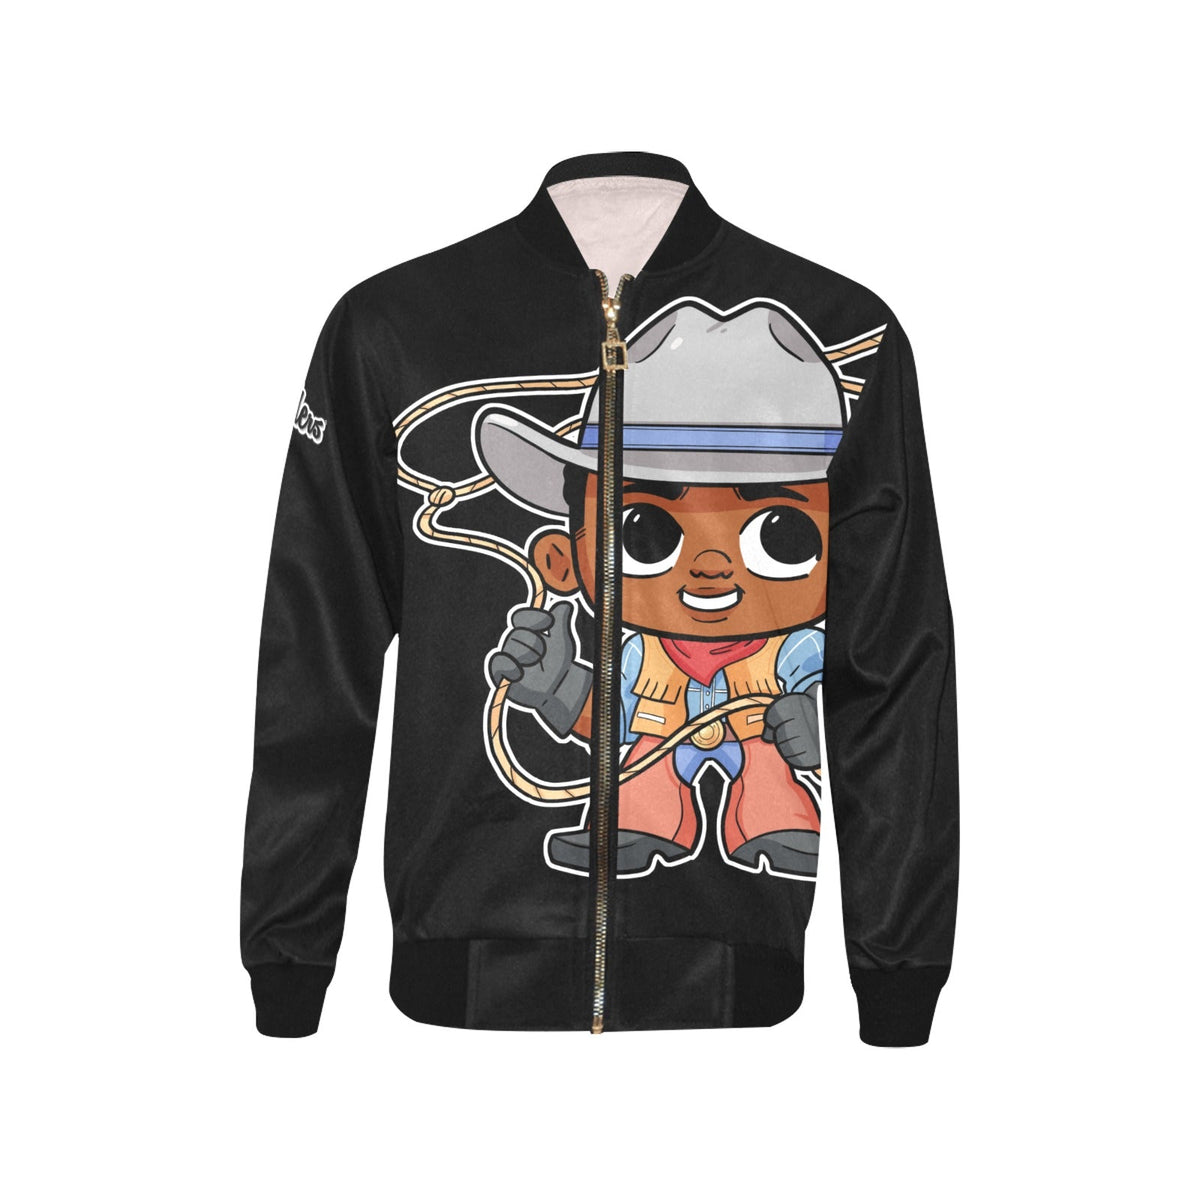 Lil Leaders® Bomber Jacket - Boys Characters